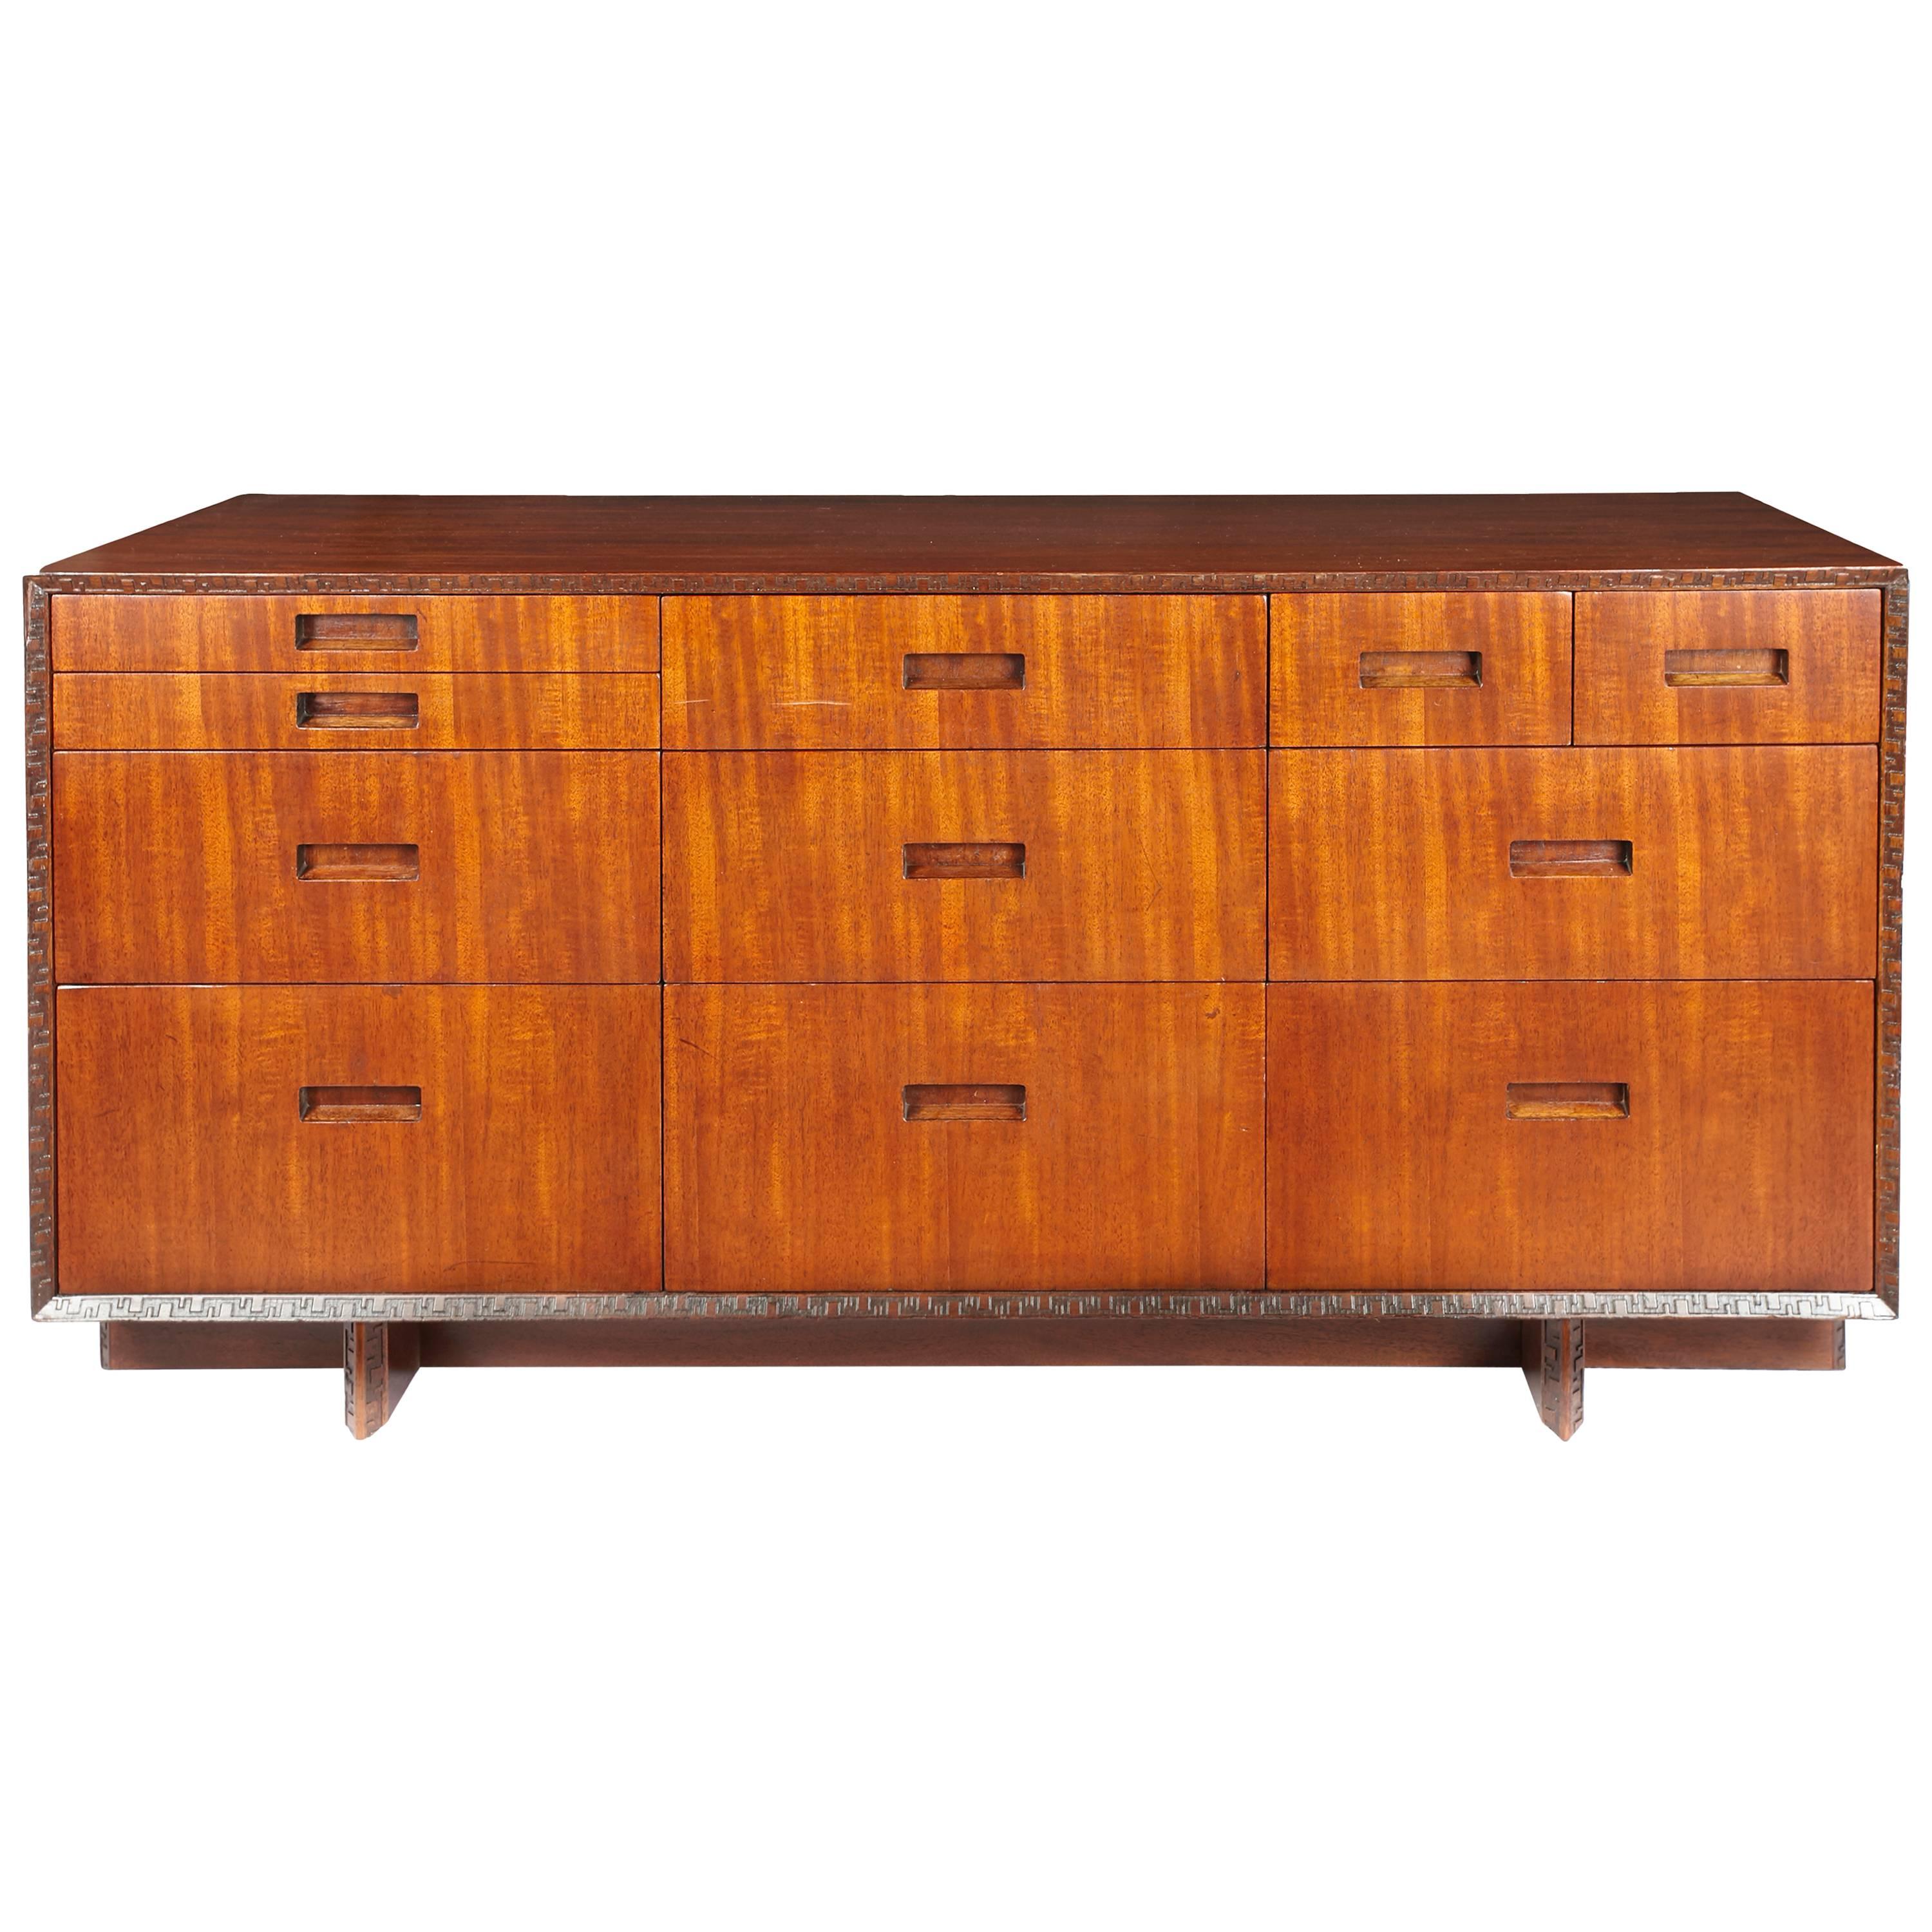 Frank Lloyd Wright Dresser for Heritage Henredon from the "Taliesen" Collection